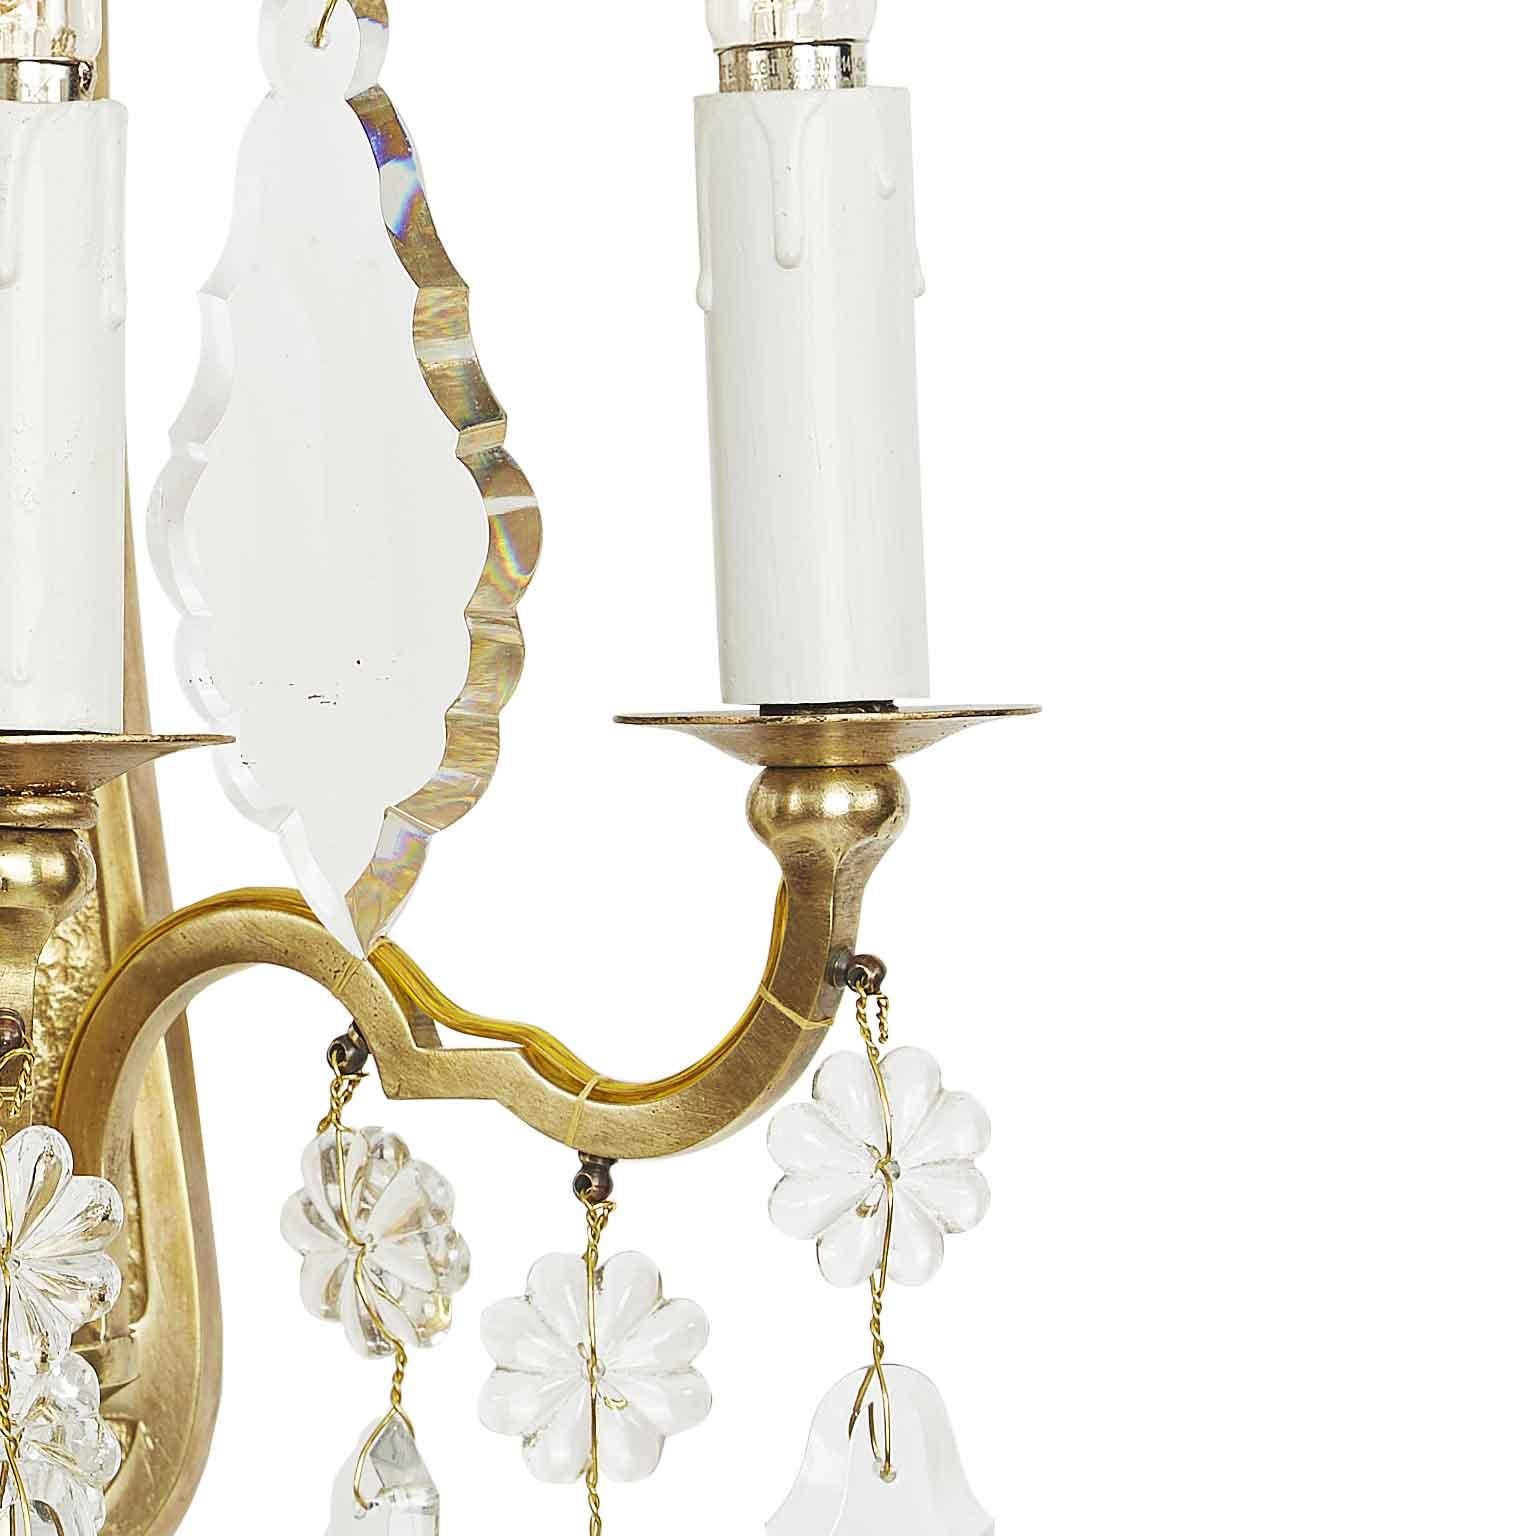 Set of Four Baccarat Crystal Sconces 20th Century French Gilt Wall Lights 1